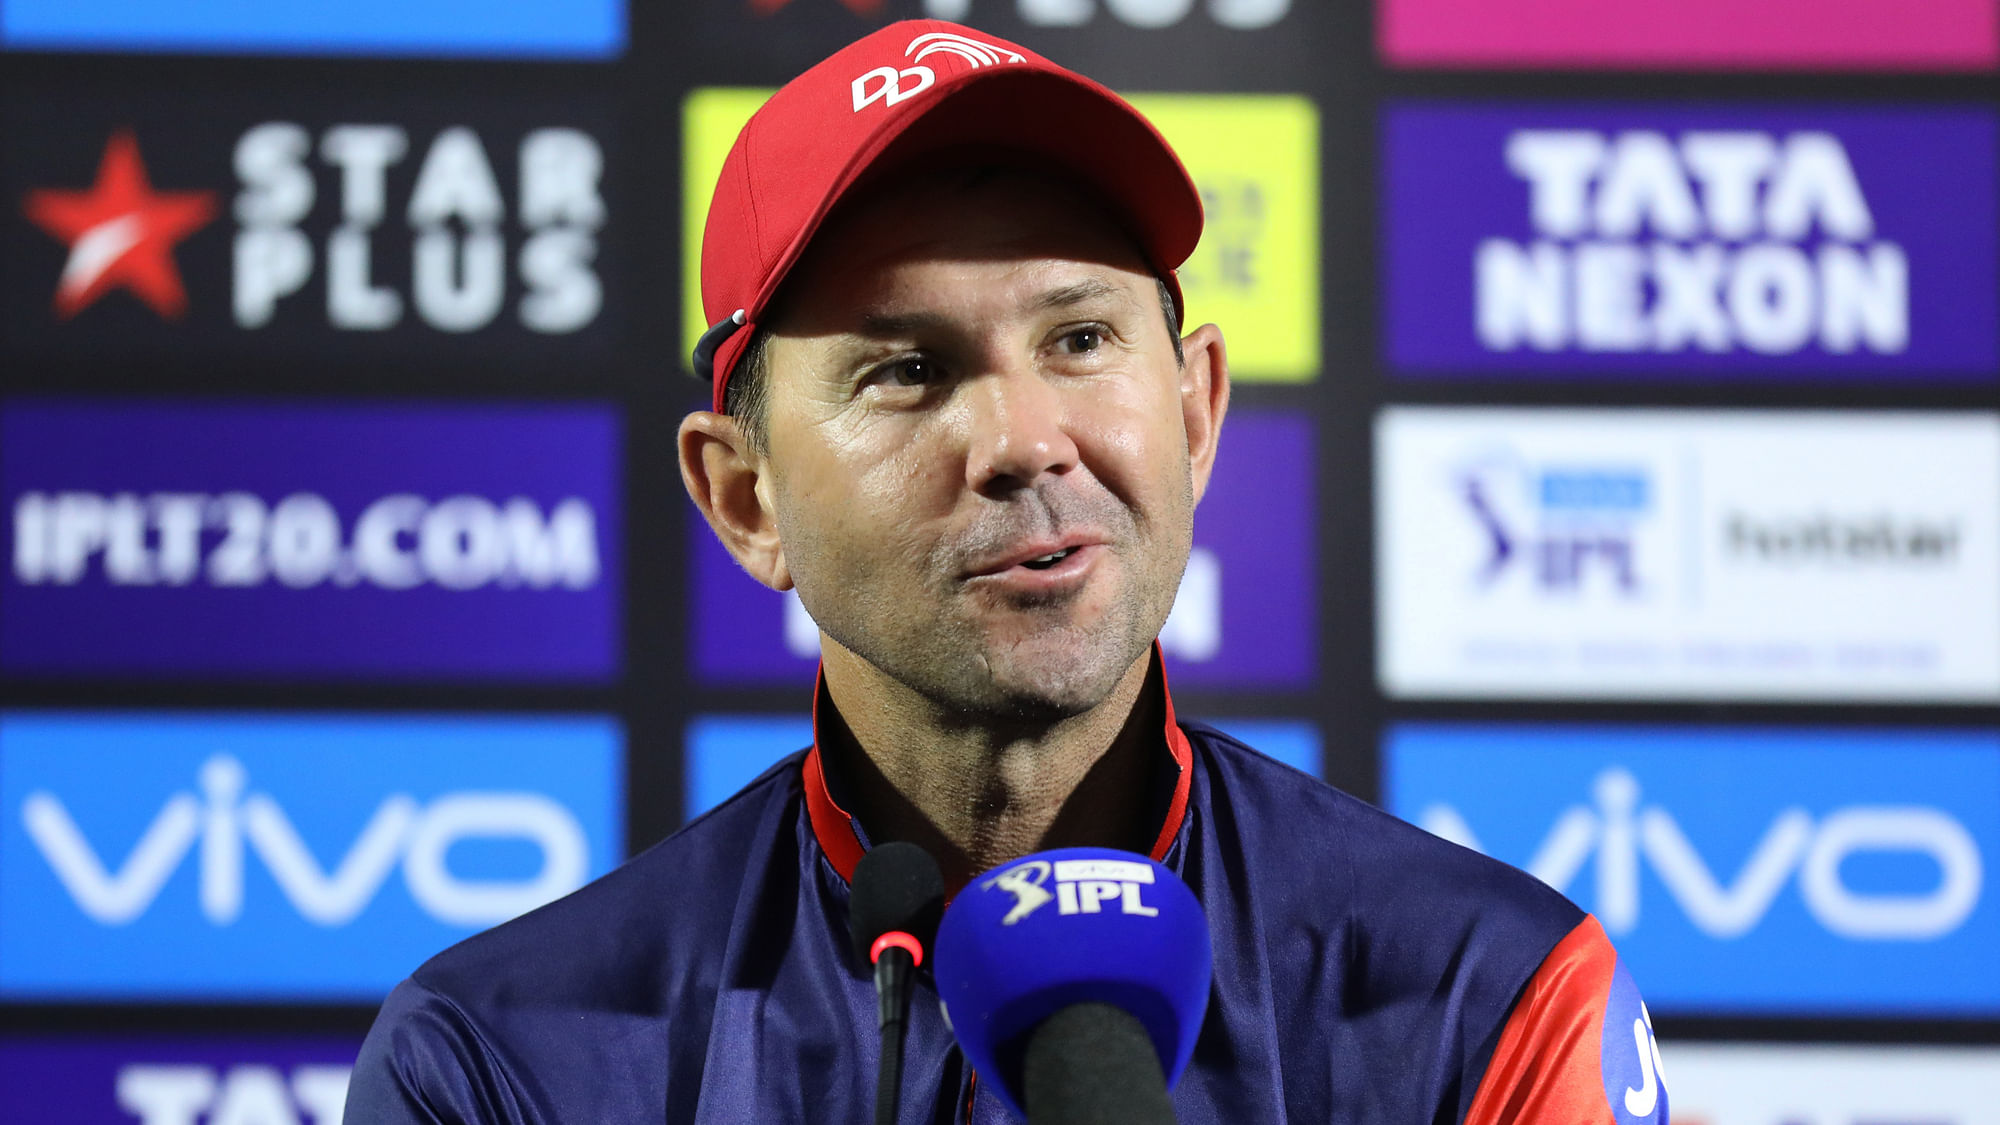 Ricky Ponting was all praise for Rishabh Pant and Shreyas Iyer after Delhi Daredevils campaign ended with a win against Mumbai Indians